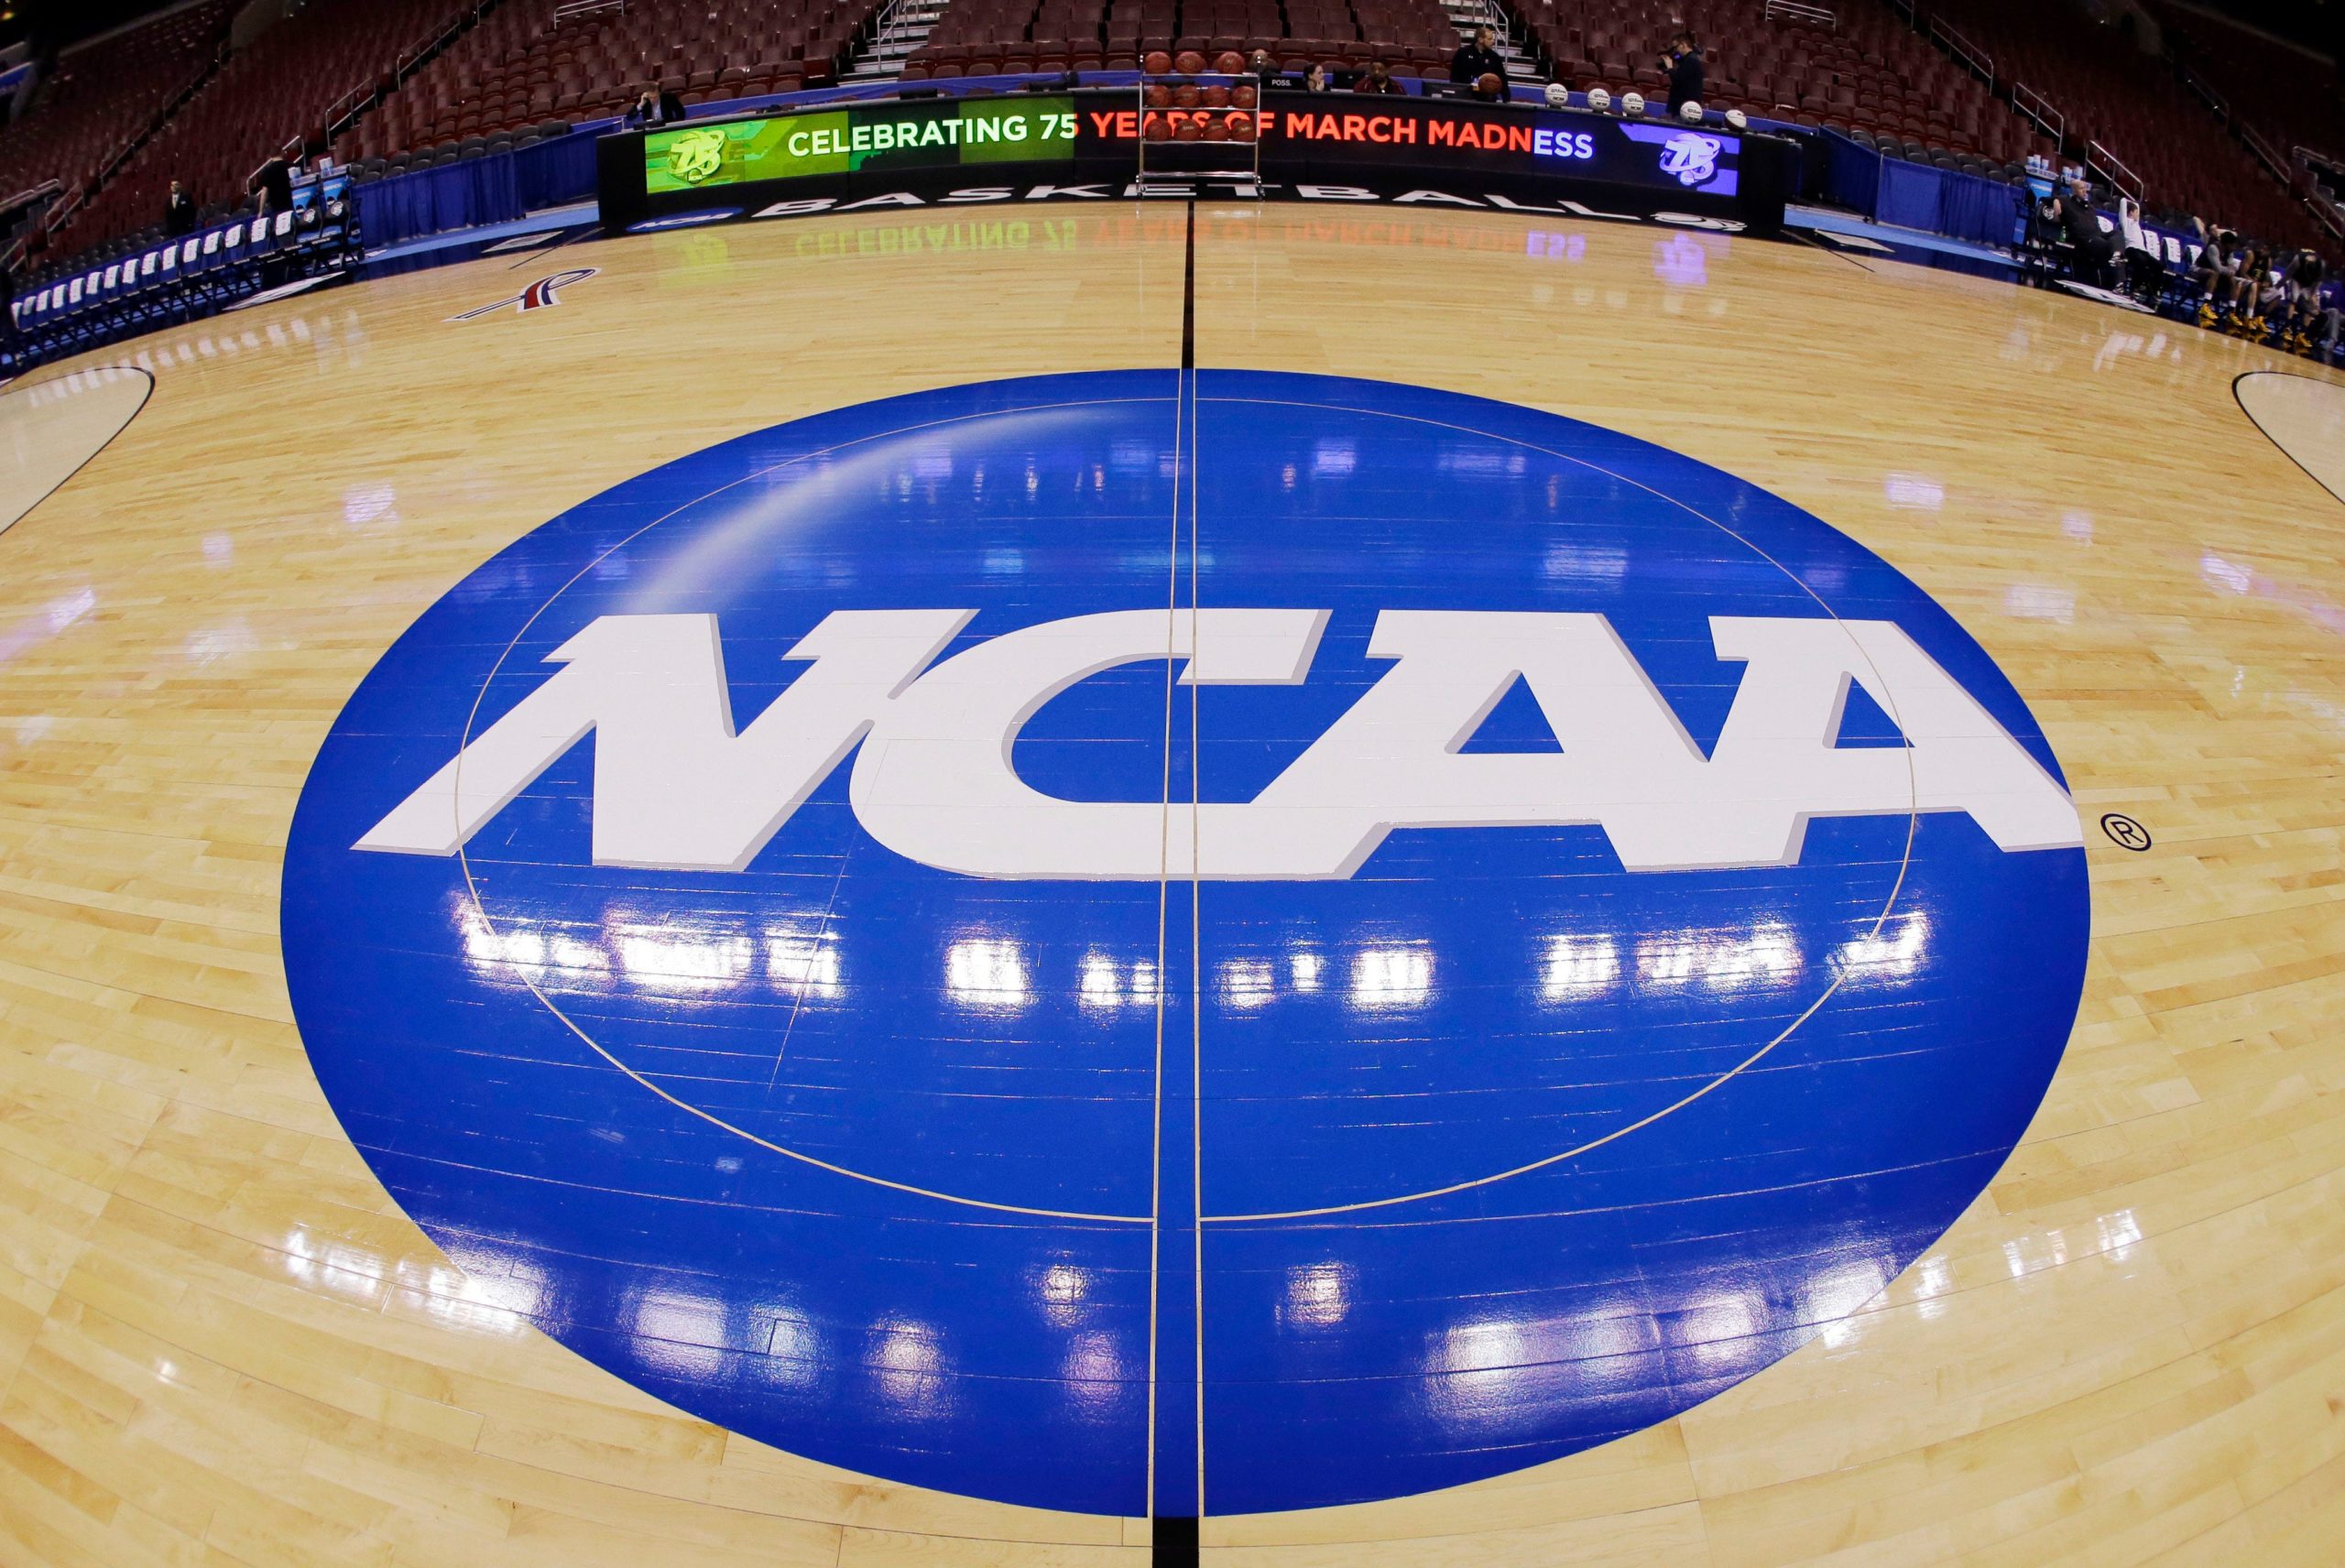 NCAA adopts policy to vet college athletes for sexual assault, but lets them stay eligible